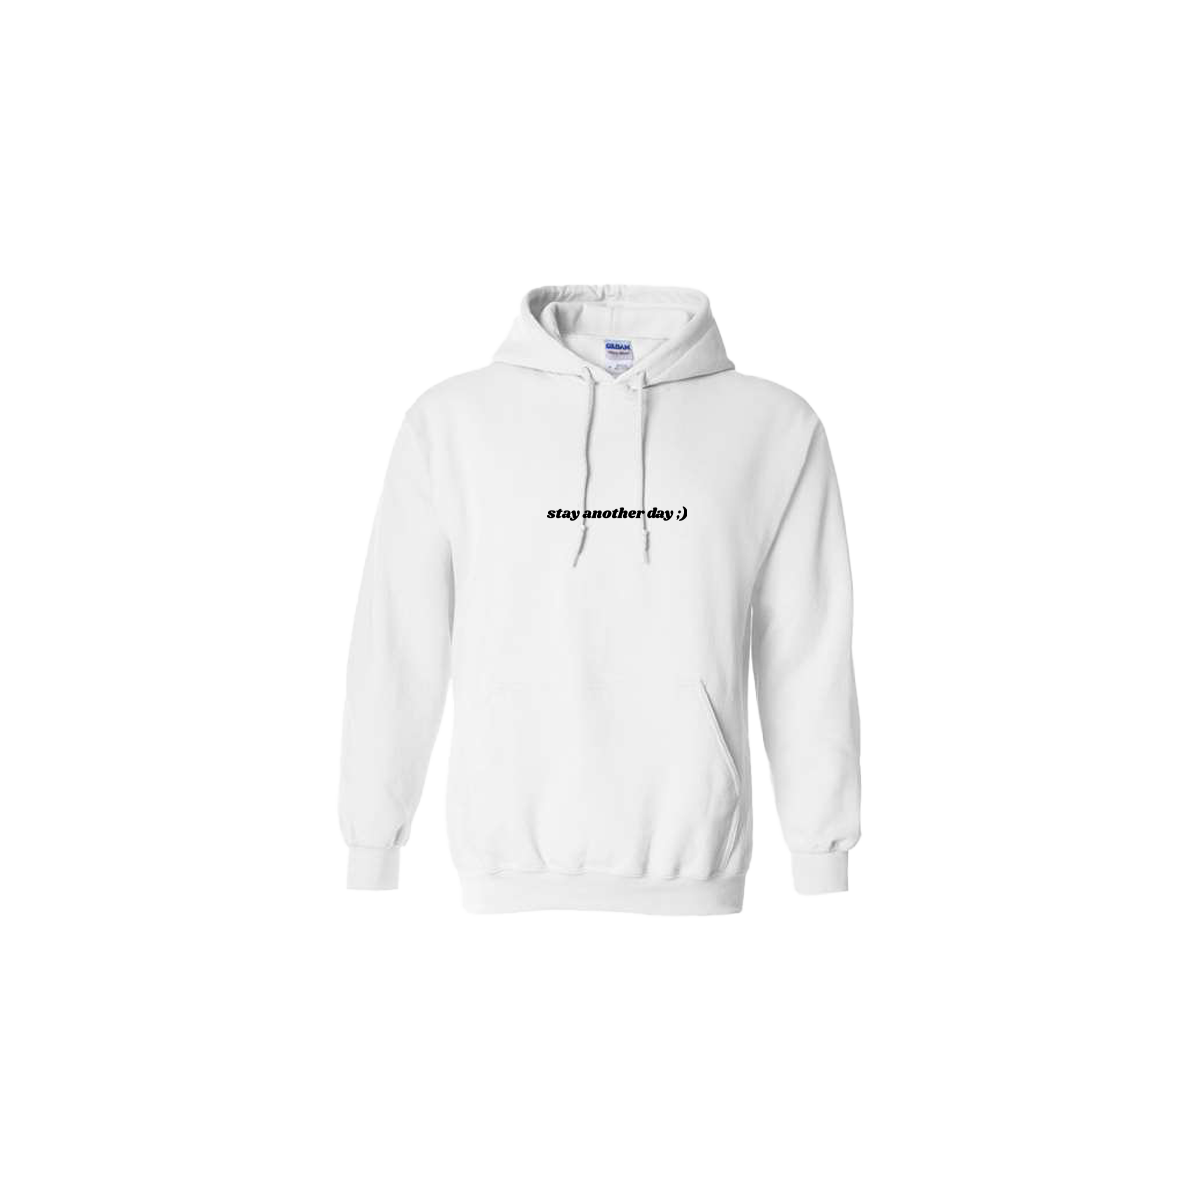 Stay Another Day Embroidered White Hoodie - Mental Health Awareness Clothing